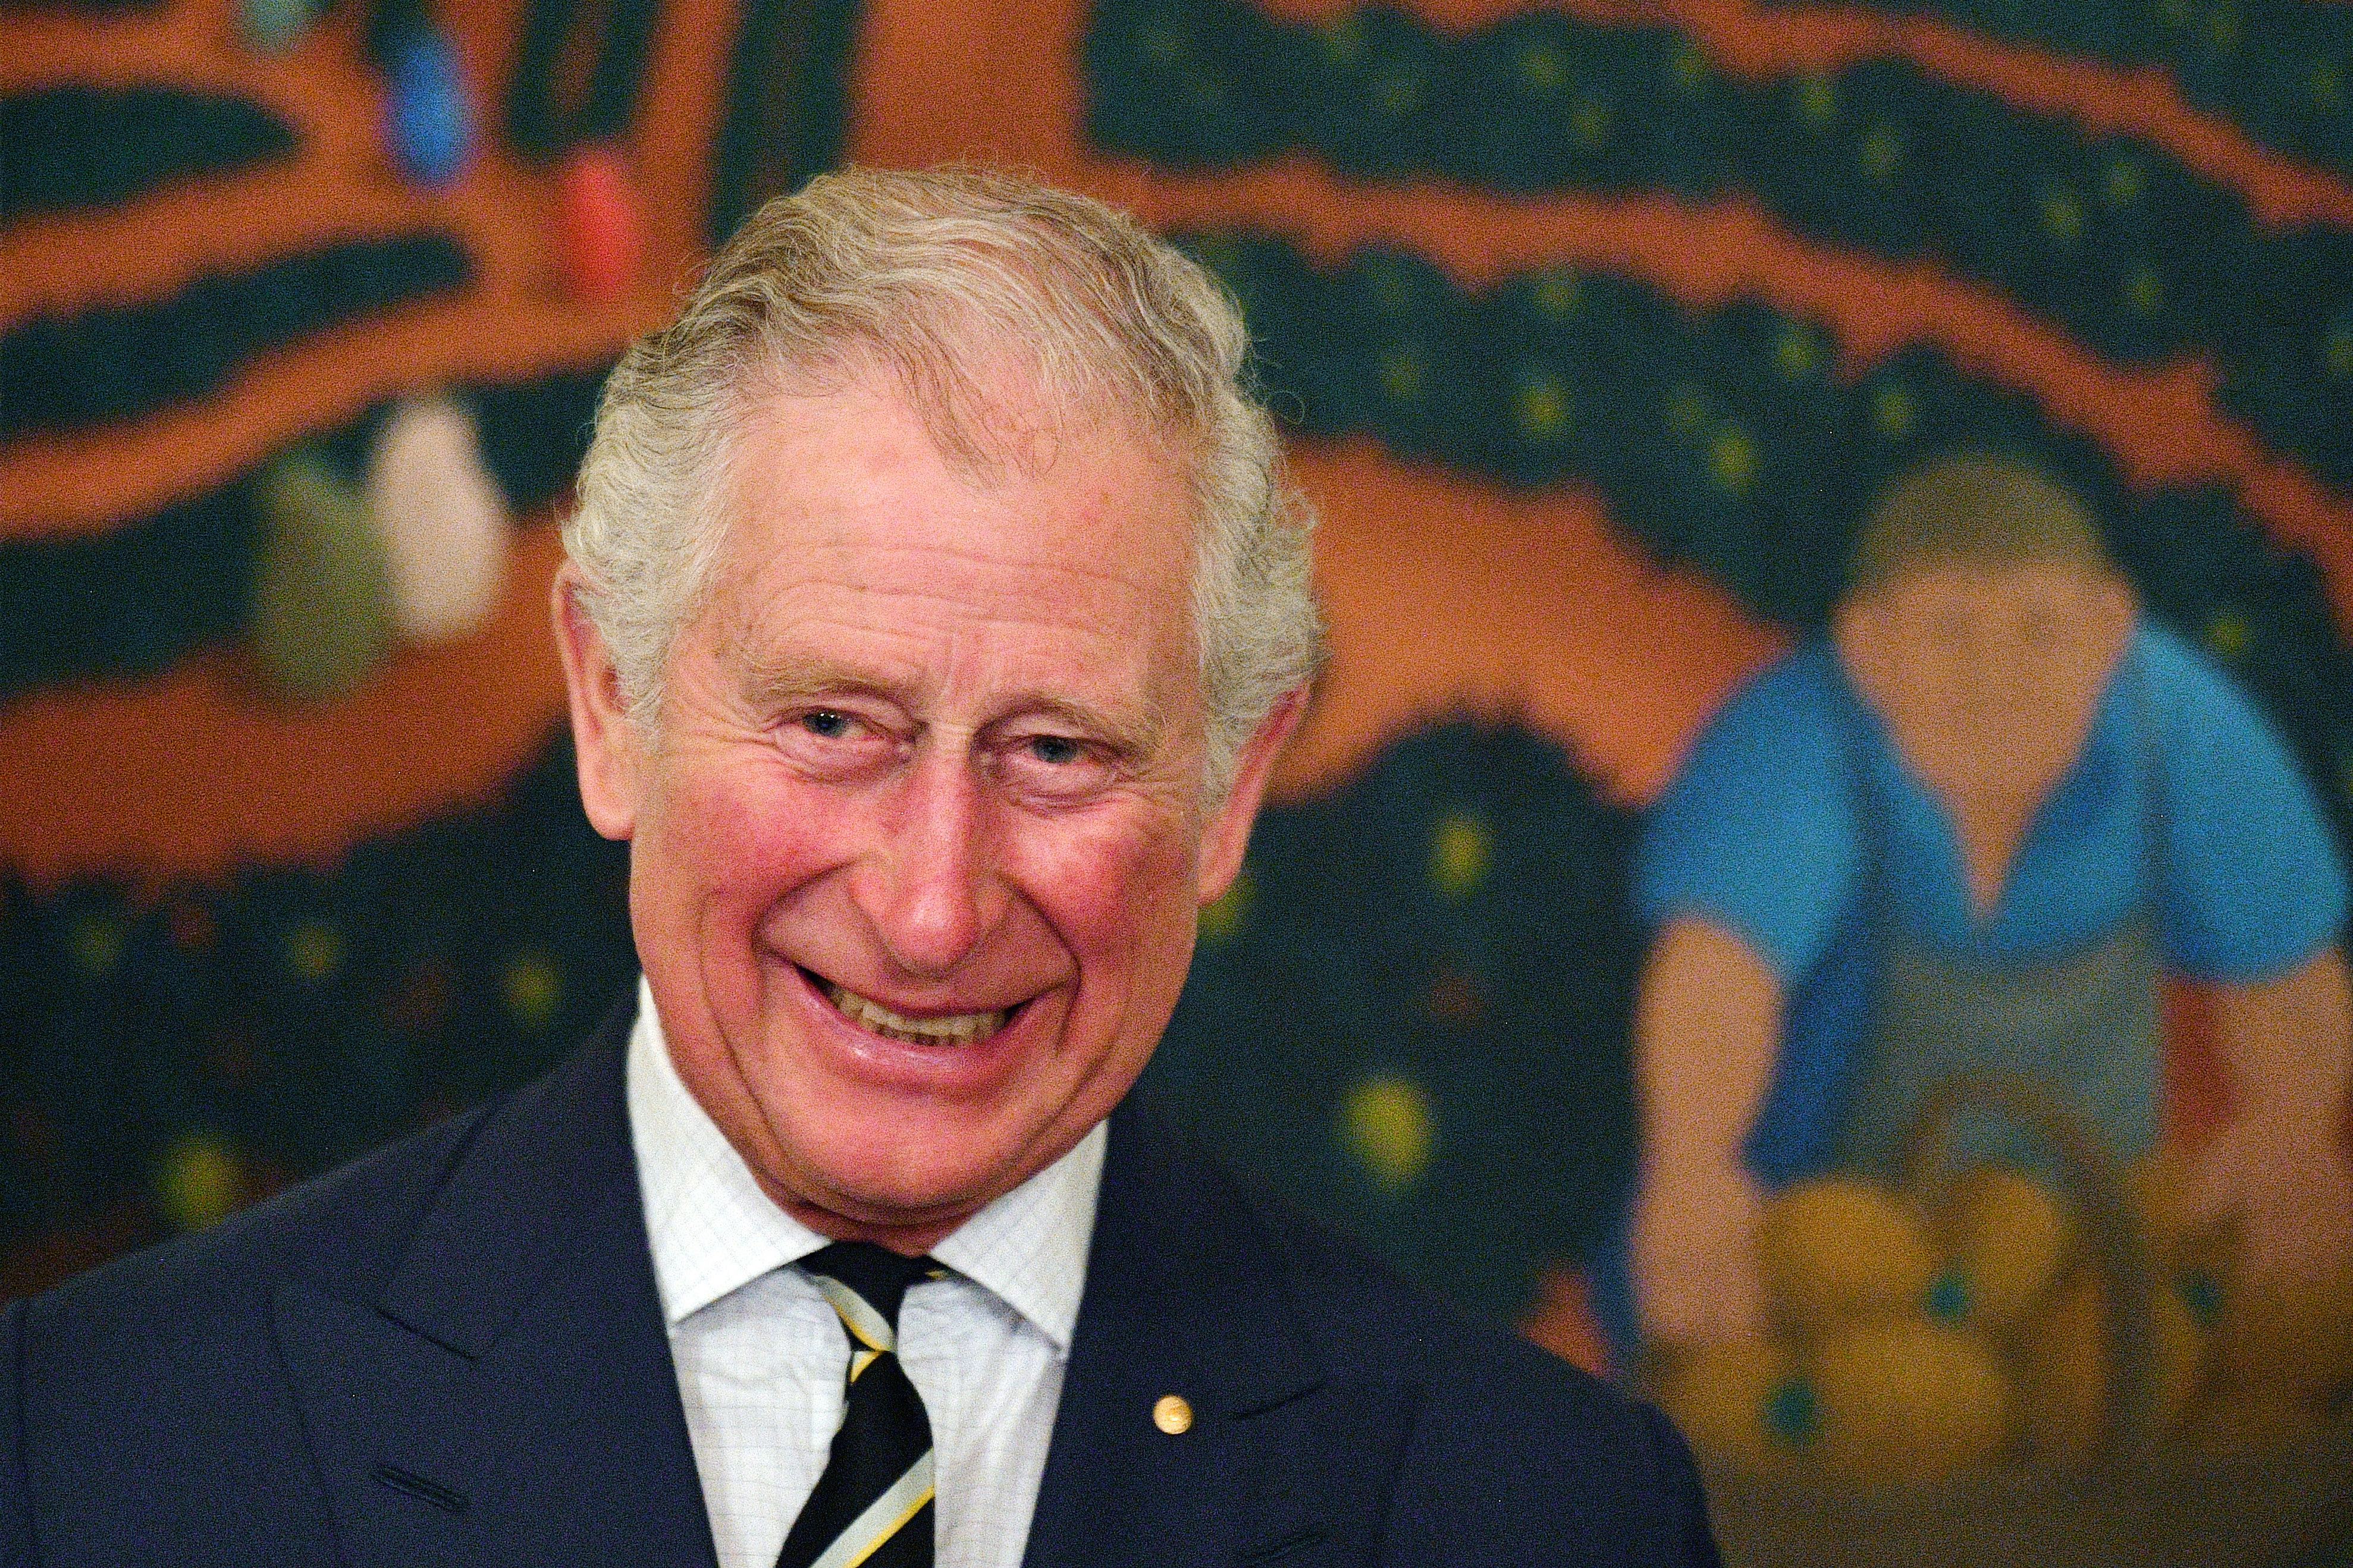 Prince Charles, Prince of Wales attends a reception at Queensland Government House in Brisbane on April 6, 2018 in Brisbane, Australia. (Mick Tsikas—Pool/Getty Images)